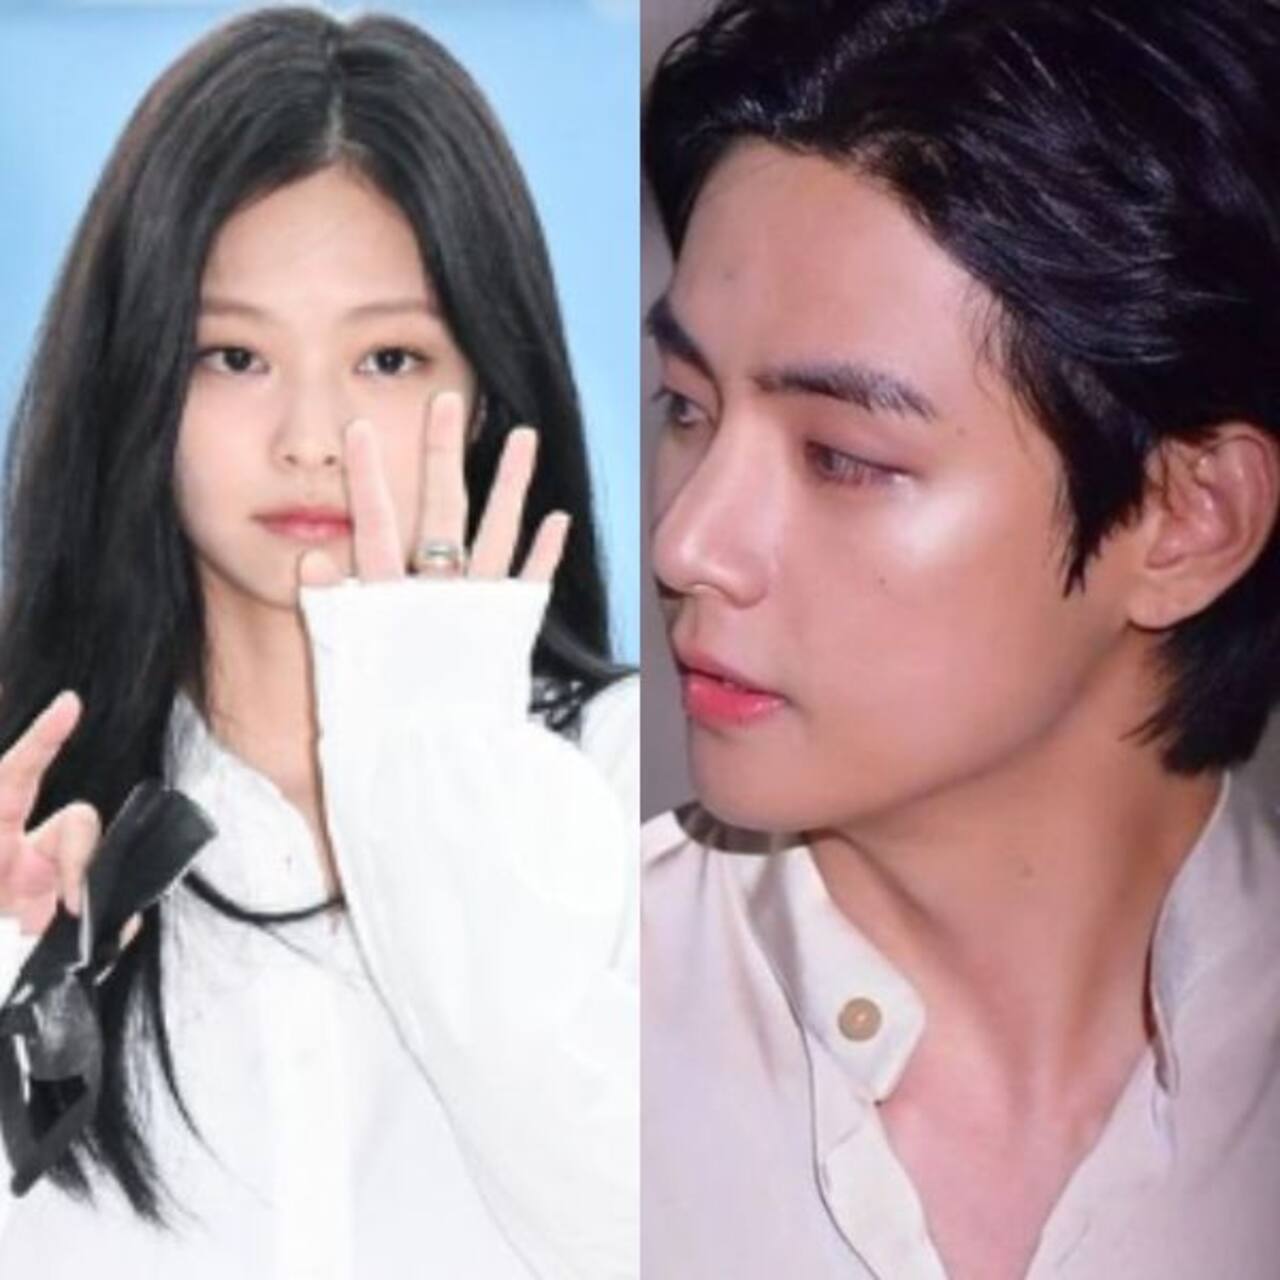 BTS: Kim Taehyung aka V and Blackpink rapper Jennie's viral pics are fake? Fans bust mystery about their dating rumours